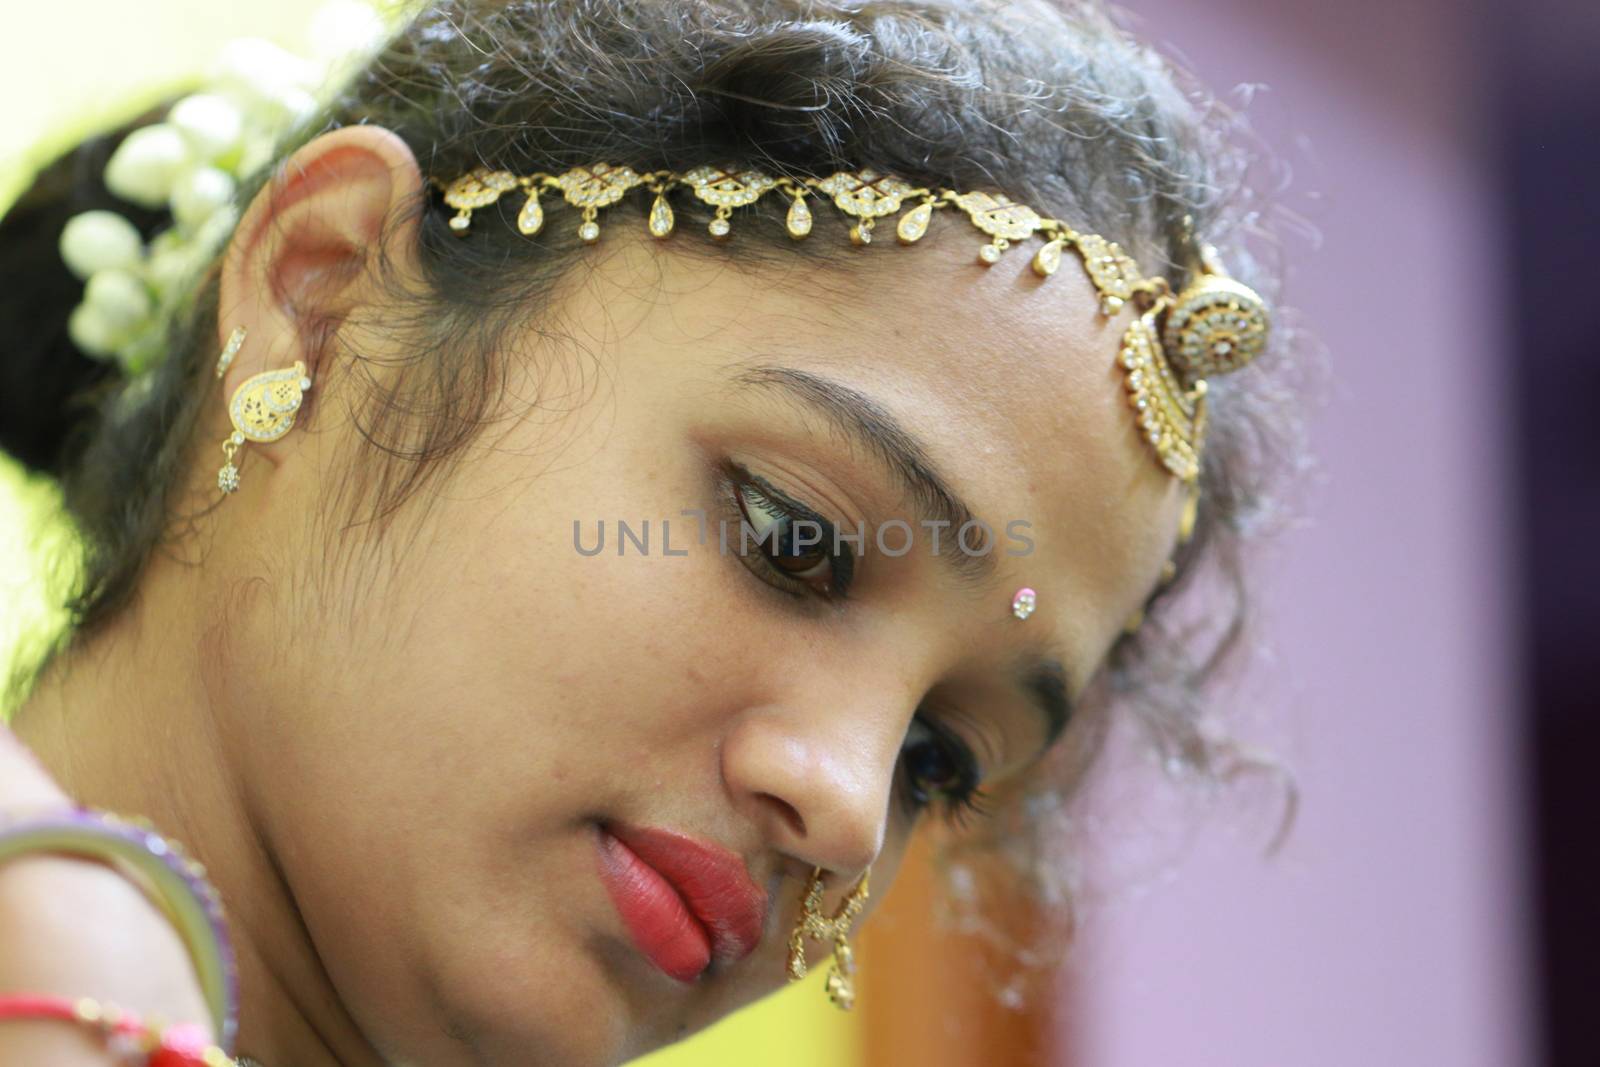 The face of a beautiful north india girl with traditional Rajasthani head gold jewellery (Maang tikka). by 9500102400